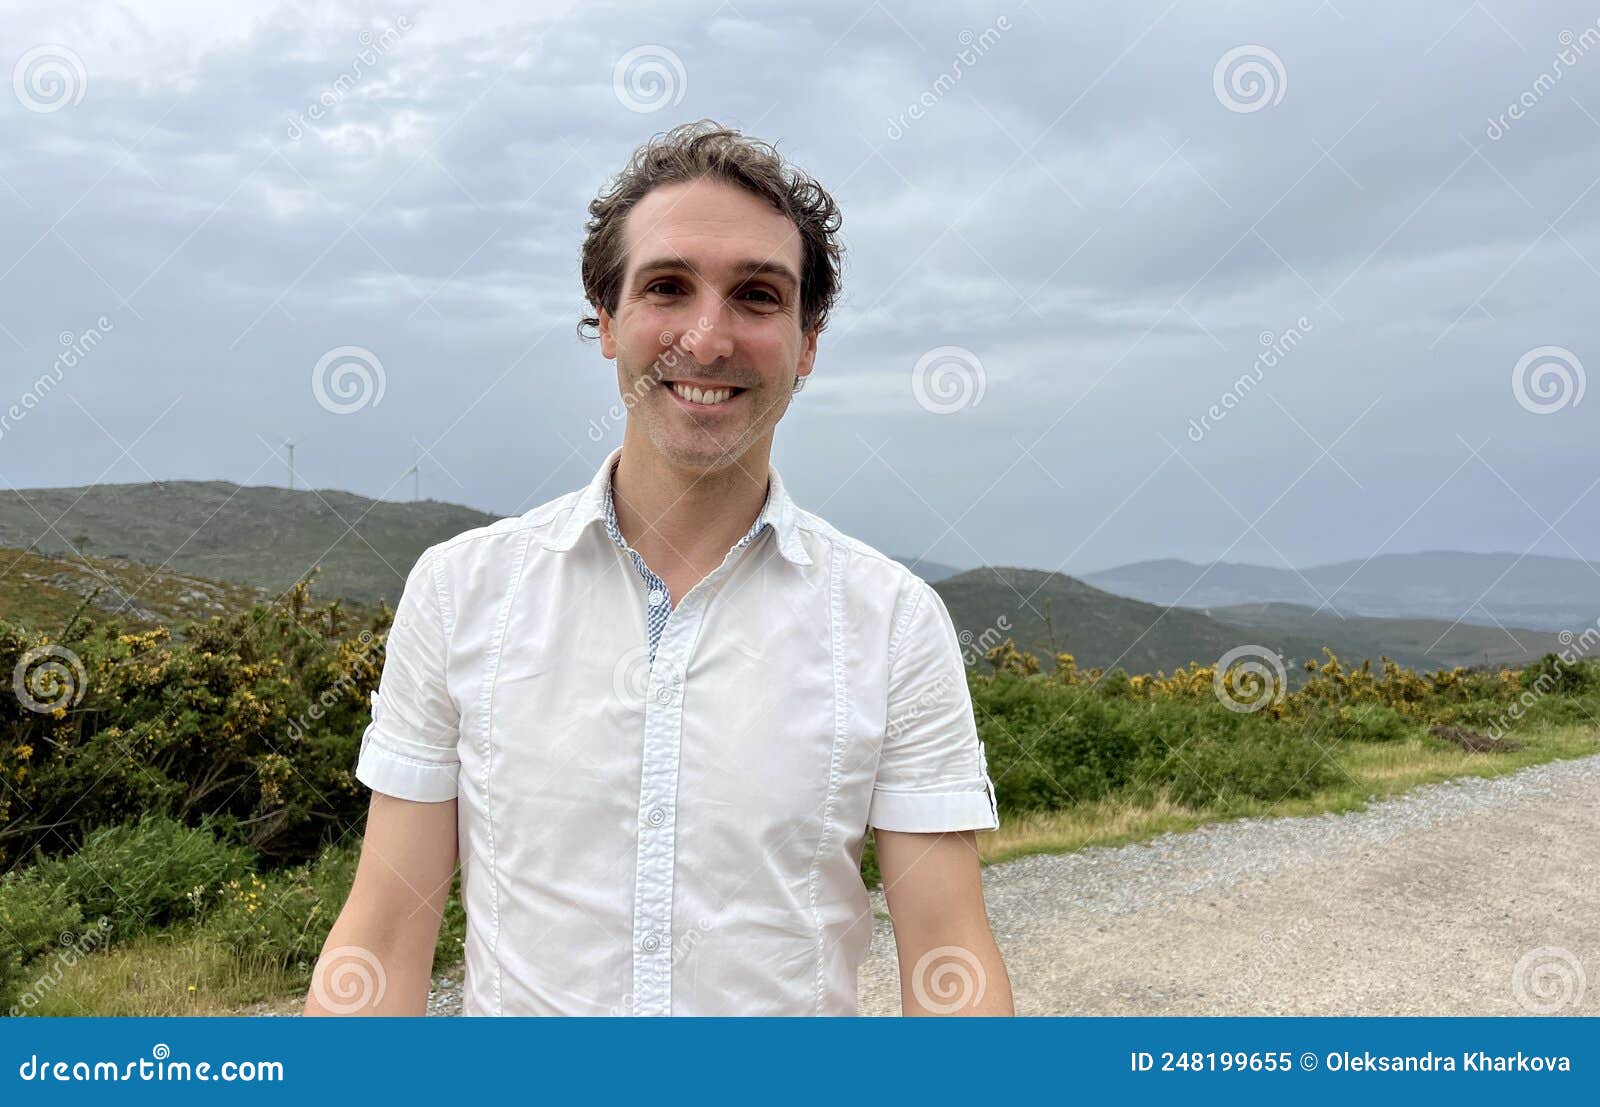 a handsome french or spaniard man in a white shirt stands against the backdrop of mountains